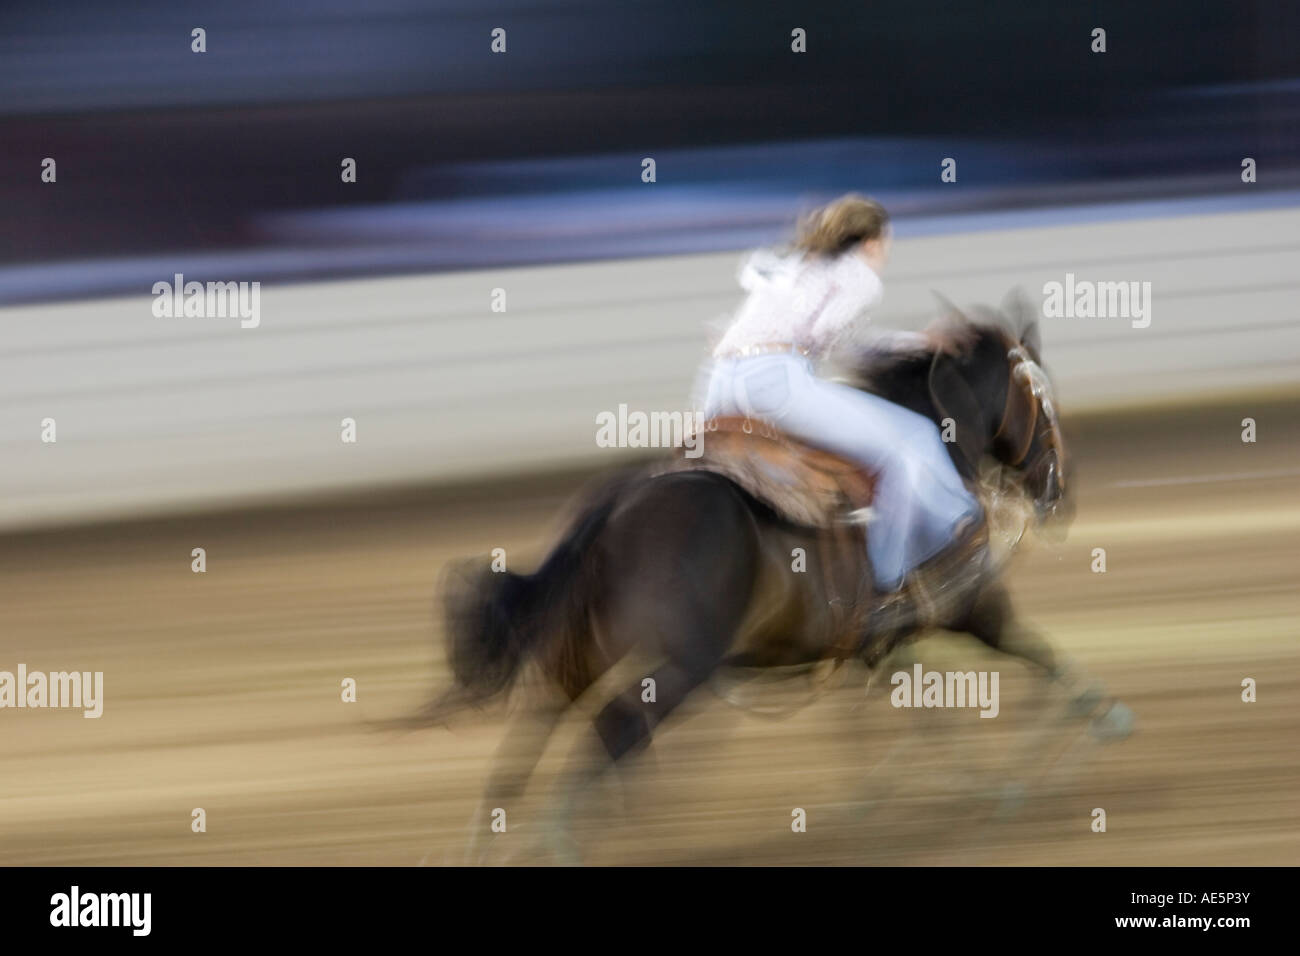 Teenage girl racing on her horse in a blur as they compete in a barrel racing event Stock Photo